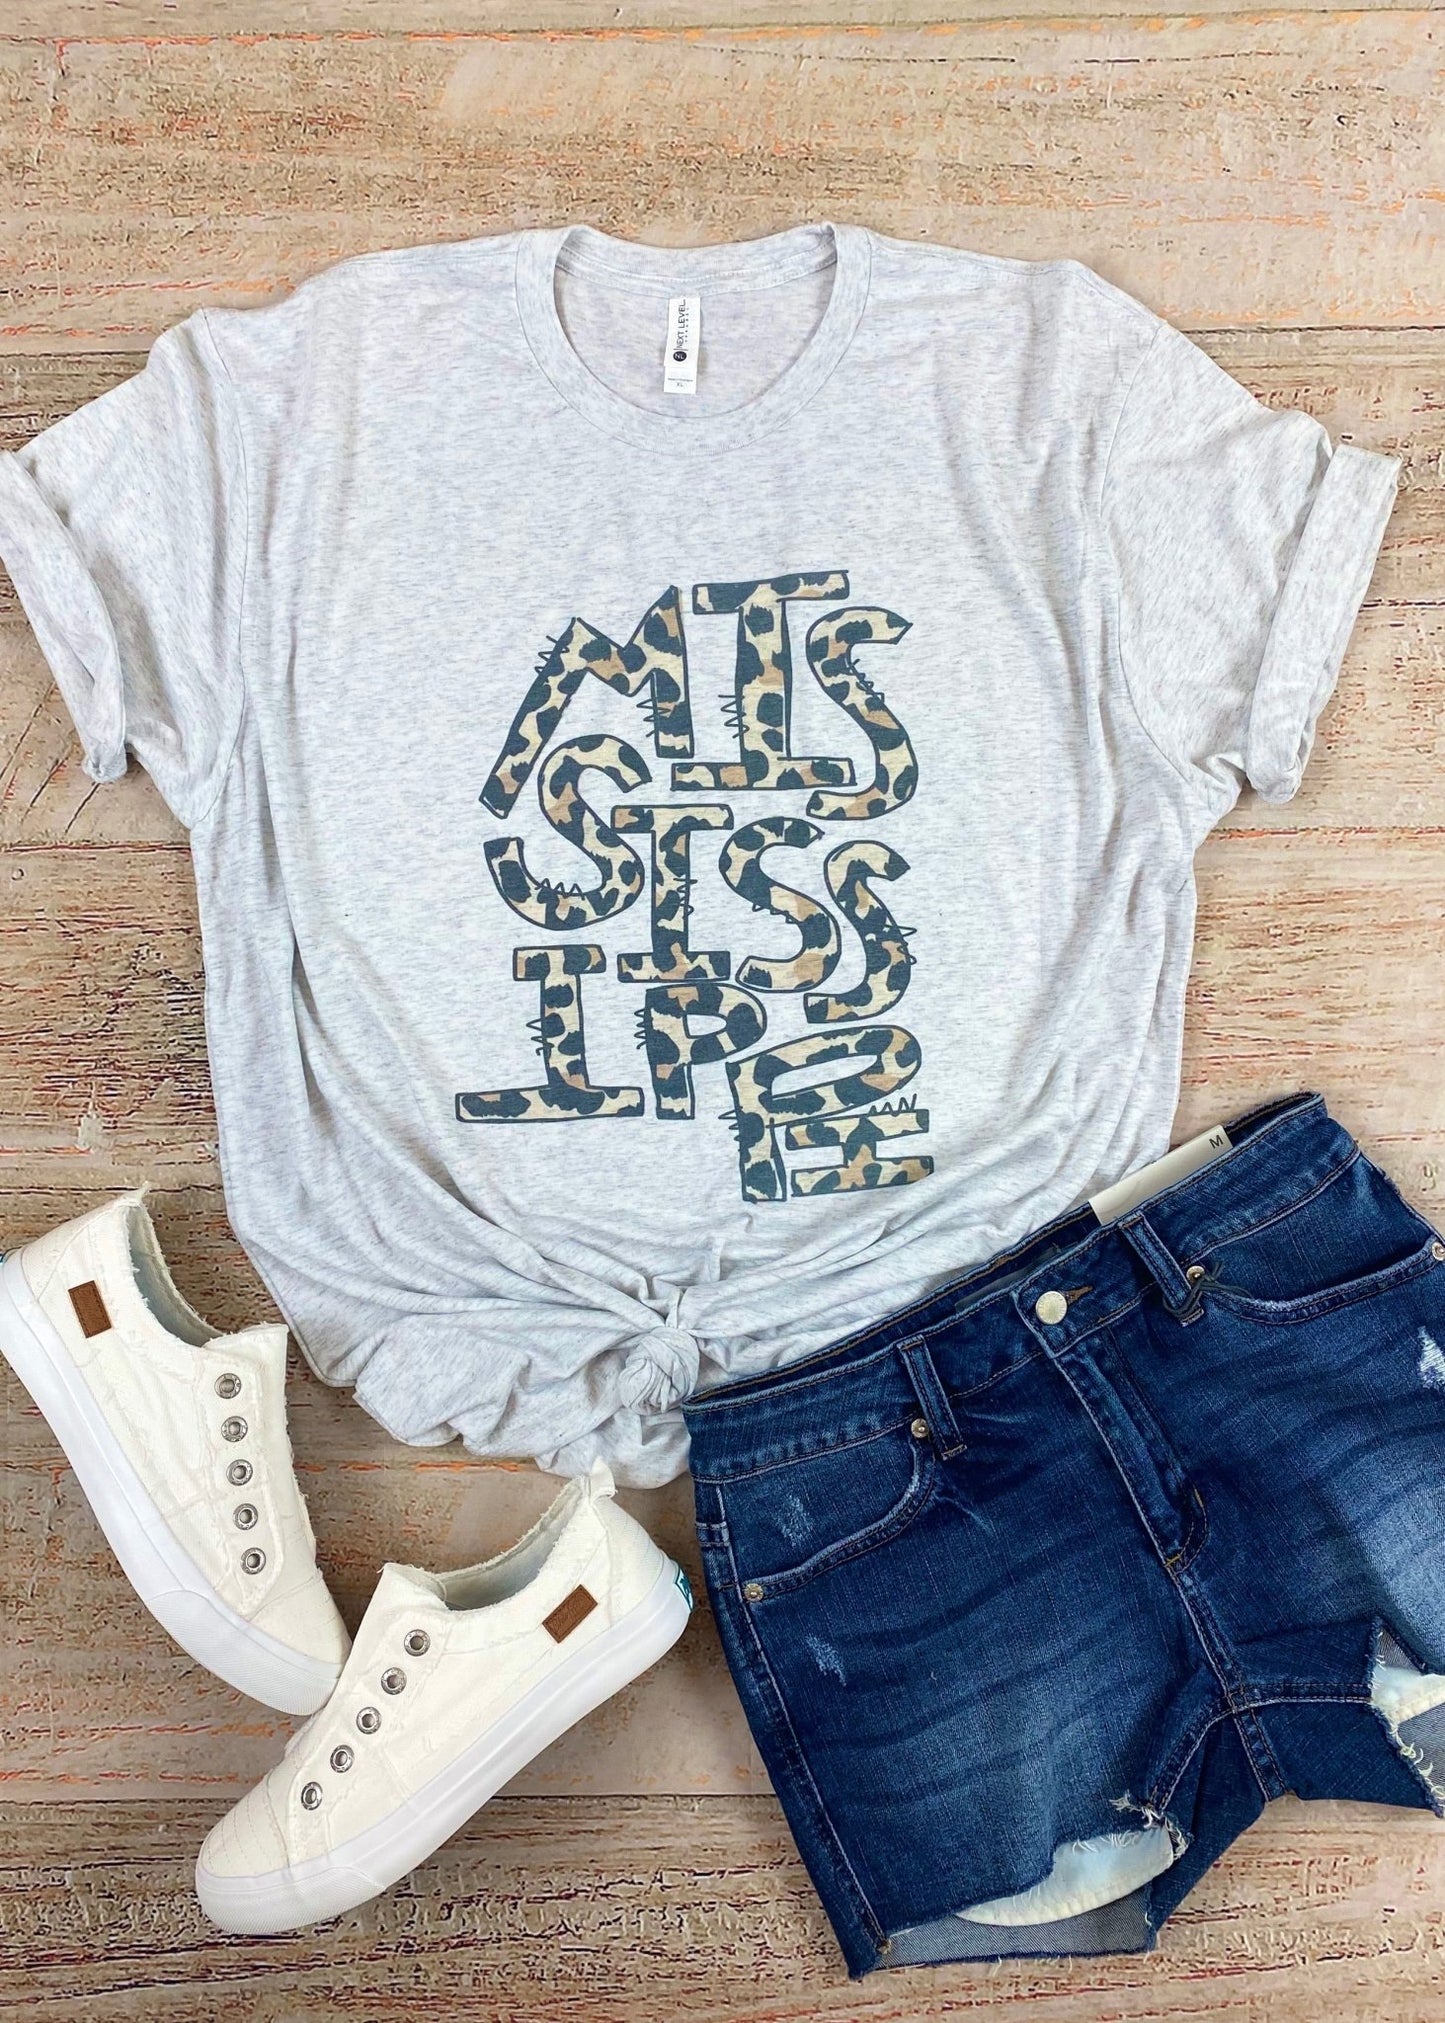 Mississippi Leopard Graphic Tee - Jimberly's Boutique